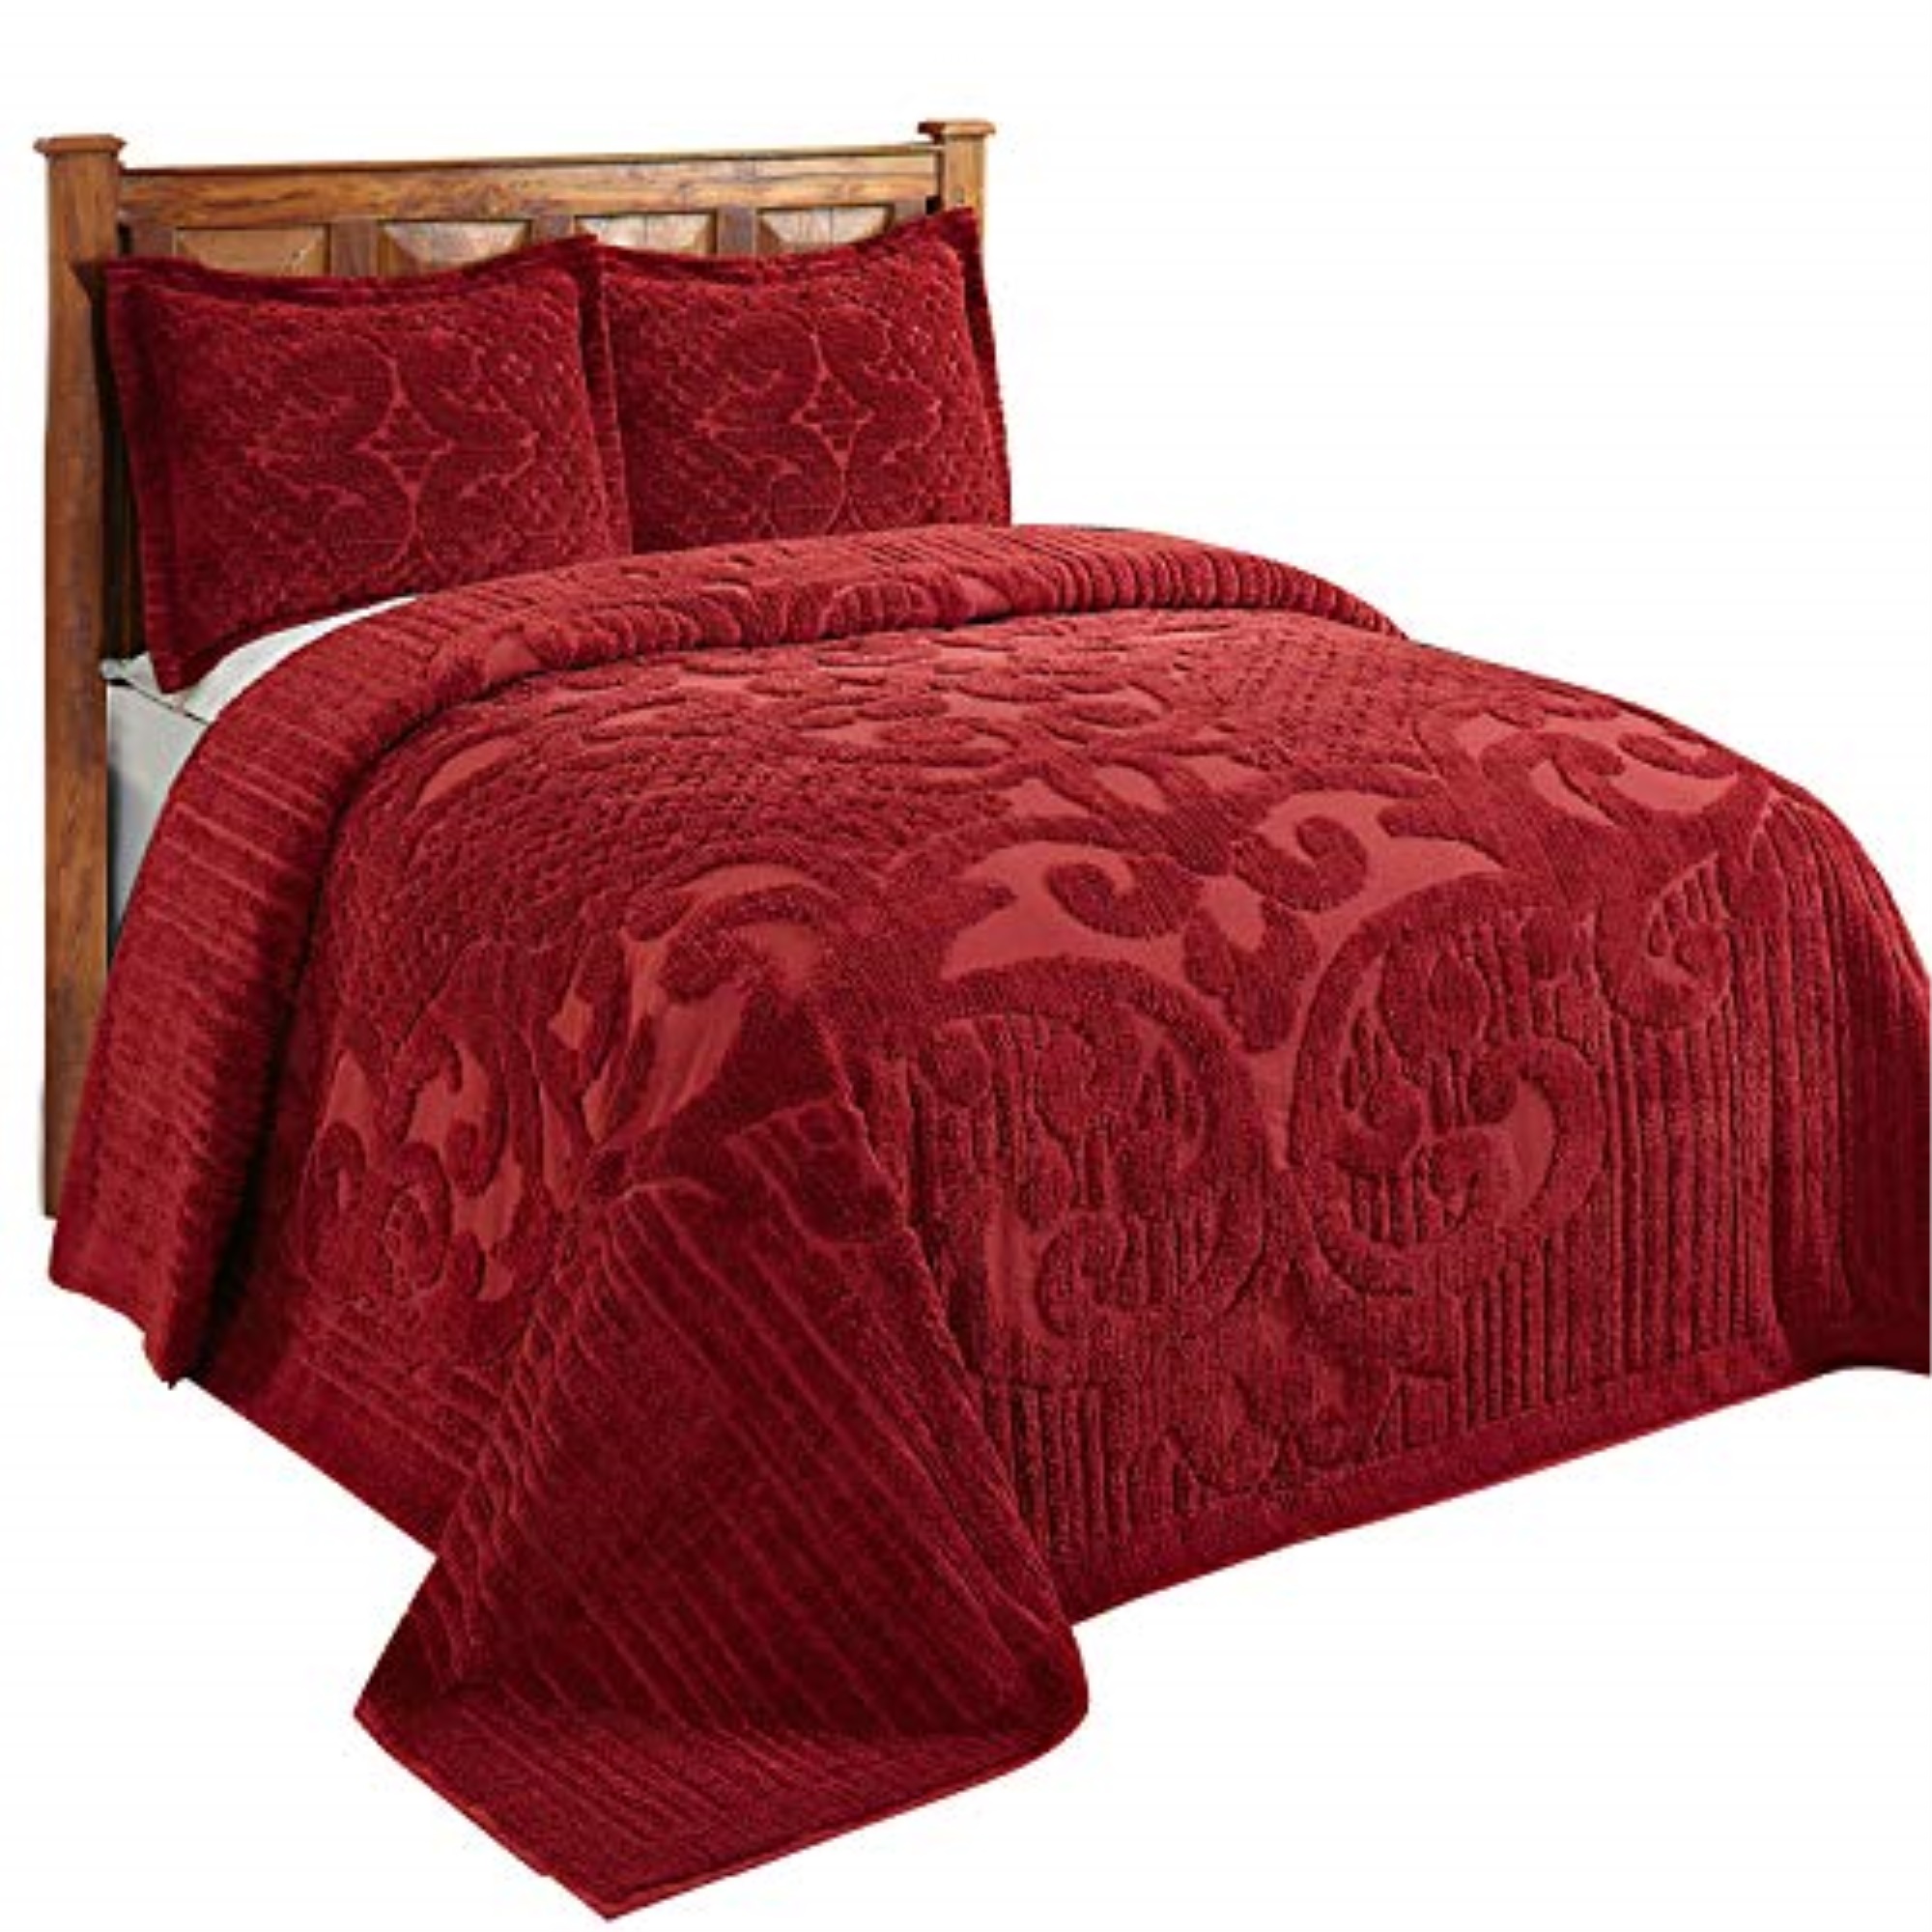 Better Trends Ashton Collection Full/Double Bedspread in Burgundy